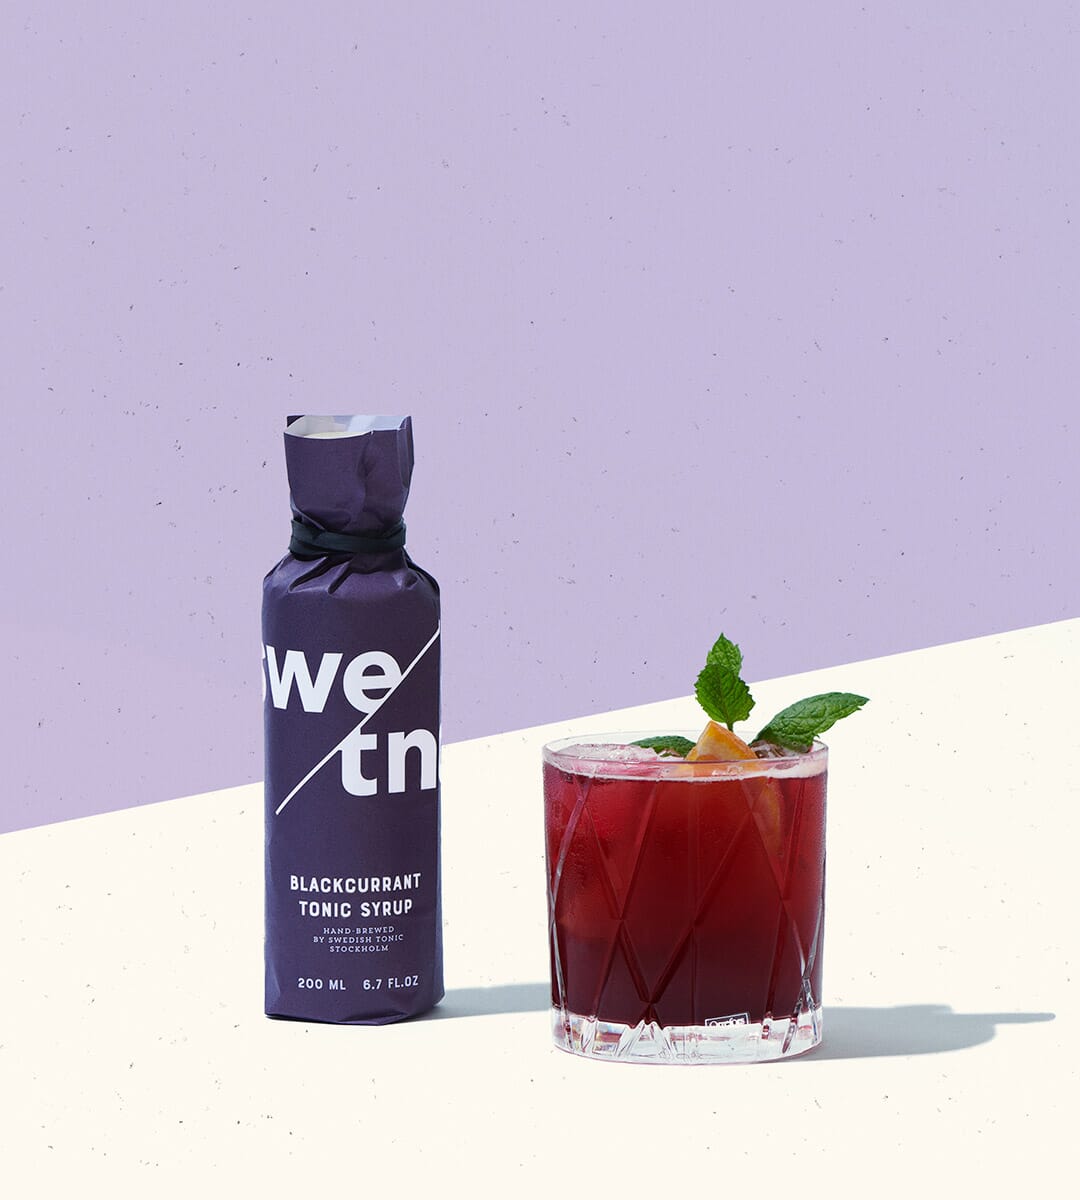 Swedish Tonic Blackcurrant with blackcurrant flavour for your Gin & Tonic